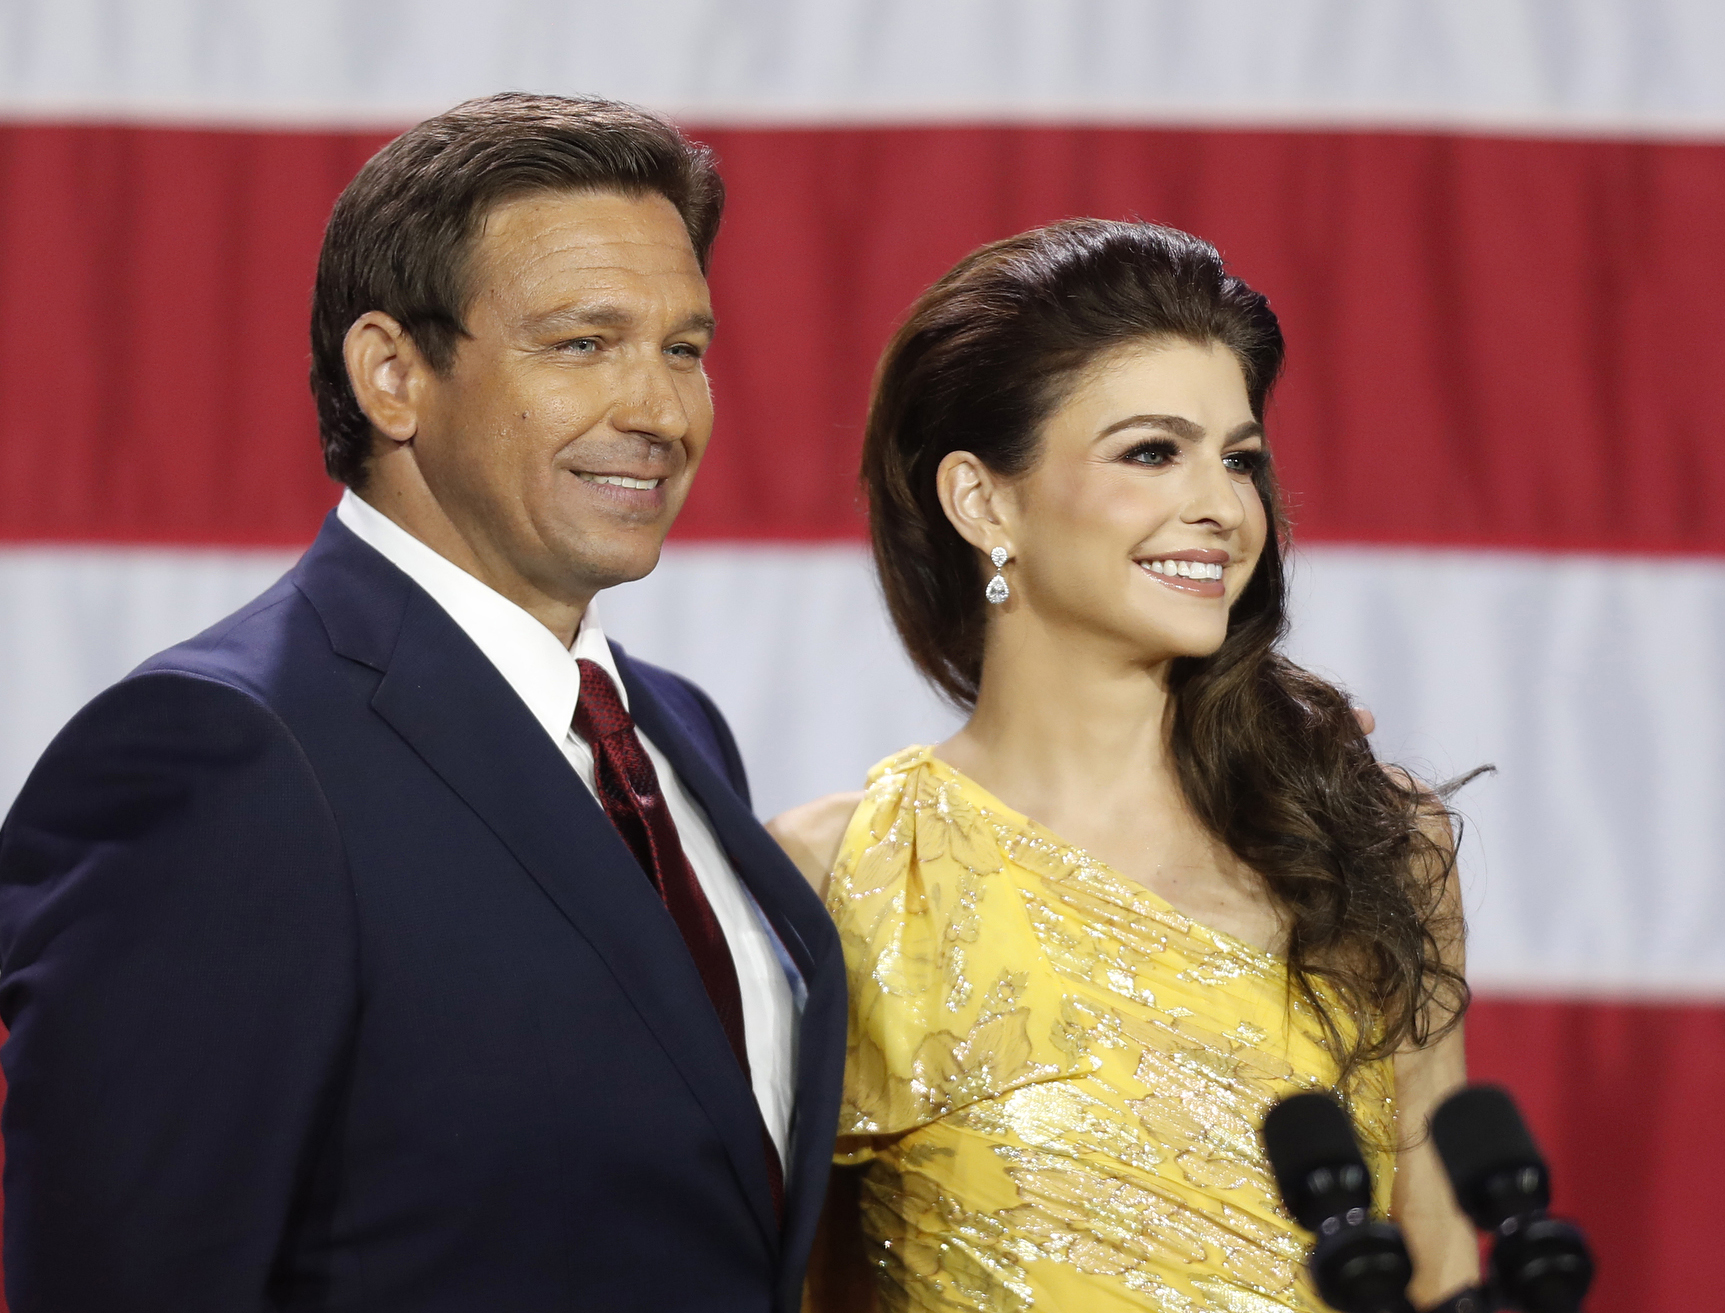 <p><span>Florida's Governor Ron DeSantis was a naval officer -- a new lawyer assigned to the Navy Judge Advocate General's Corps (JAG) -- when he met his now wife, Florida first lady Casey DeSantis (née Black), at a golf course in 2006. He thought she was looking over at him, but Casey claimed she was just eyeing his bucket of practice golf balls. "I used the balls as a way to start talking to her," Ron admitted in a March 2023 </span><a href="https://www.instagram.com/p/CqGLgFnLPdl/?hl=en">"Piers Morgan Uncensored"</a><span> interview. "So we started talking, we divvied up the balls and we hit 'em. And then we went out after that and the rest is history, but I think in fact she was looking at the balls. I do think I was wrong!" The politician still marvels at the story of how they met. "Who would have thought that we both would have been there at the same time randomly on some random day in 2006," he said. "I'm just fresh into the Navy and she's a local TV reporter at the time, and we just happened to hit it off." </span></p><p>Ron said he knew early on that Casey was worth pursuing. "I was like, 'This is different,' and I made sure to court her," he said. "Of course, I got mobilized to Iraq, so we stayed together through all that, but I told myself, 'As soon as I get back from Iraq, I'm popping the question,' and so we ended up doing that." He also revealed how he proposed. "I took her to a nice little resort in Florida and we were out on the balcony, and I had a nice ring, and I just dropped to the knee and asked her," he shared. "She'd let it be known that she was happy and that we were ready to go to the next level, so, I don't think it was a super shock, but it was good to get that one in the win column, and I don't think I could have done any better in life. Not just to have a friend, we have three wonderful kids, she's a great mother, she's a great first lady. She's really the whole package." They married in 2009 at Florida's Walt Disney World Resort.</p>